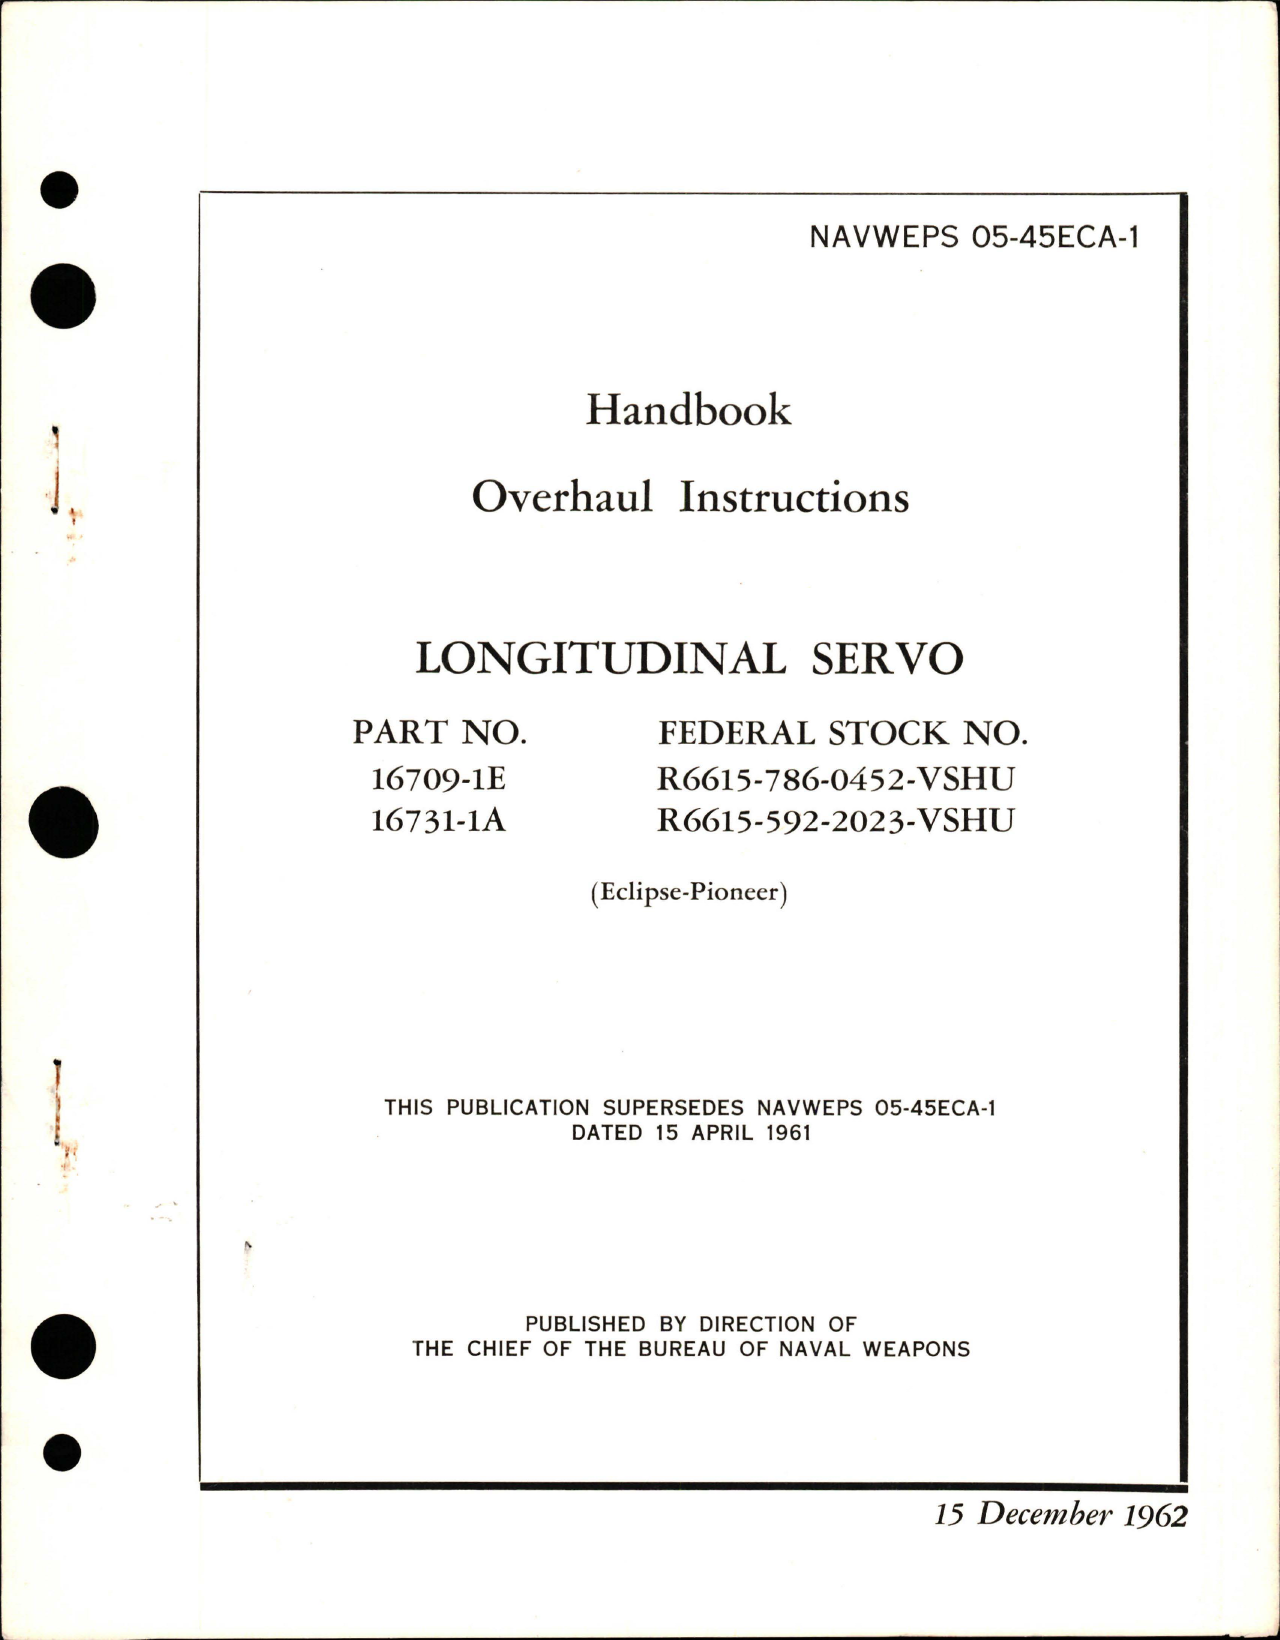 Sample page 1 from AirCorps Library document: Overhaul Instructions for Longitudinal Servo - Parts 16709-1E and 16731-1A